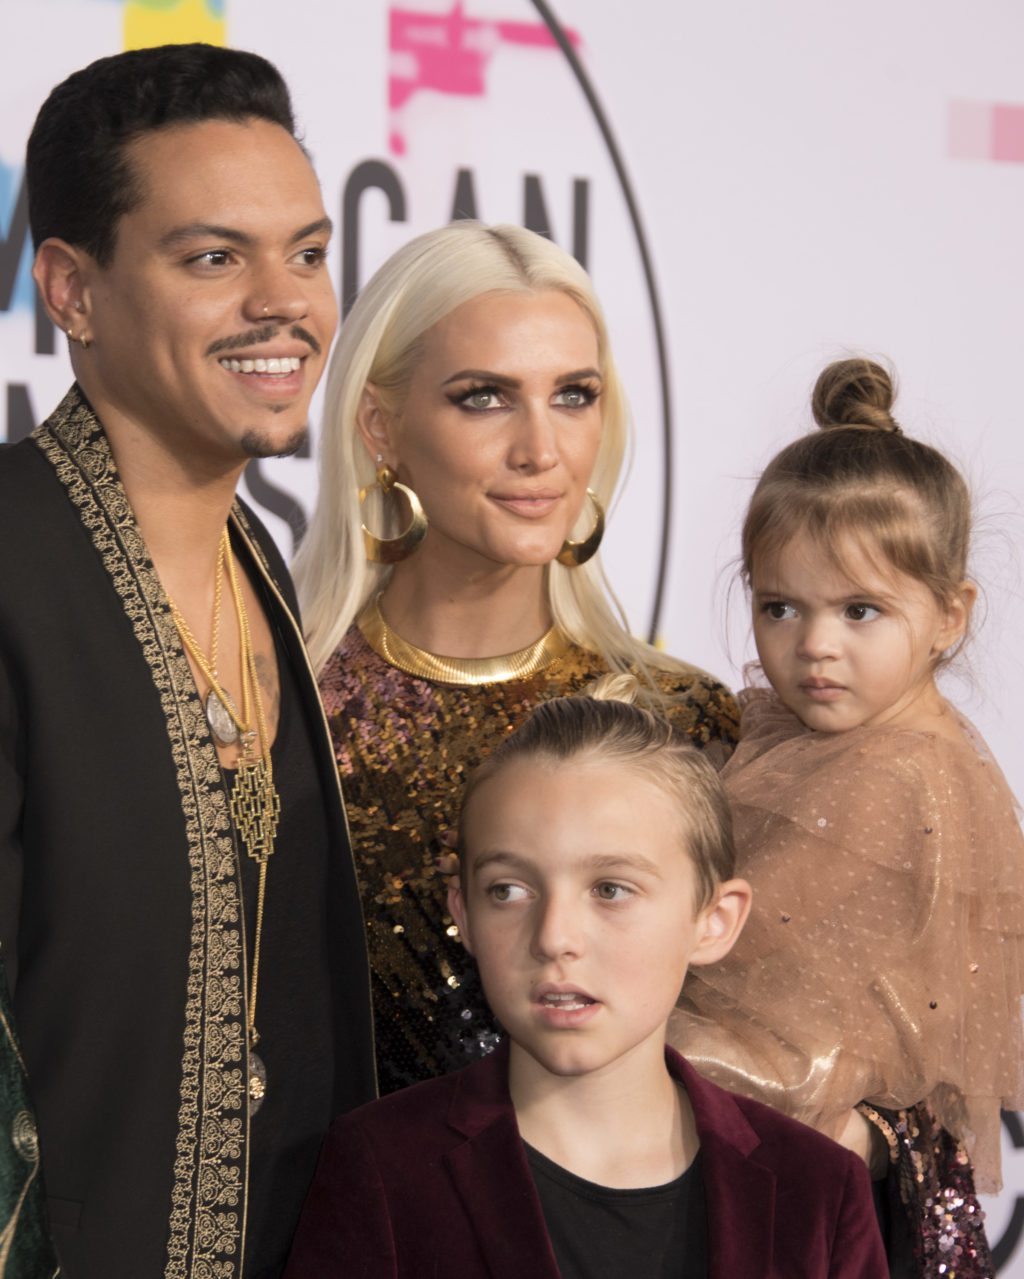 Evan Ross, Ashlee Simpson and children at AMAs 2017